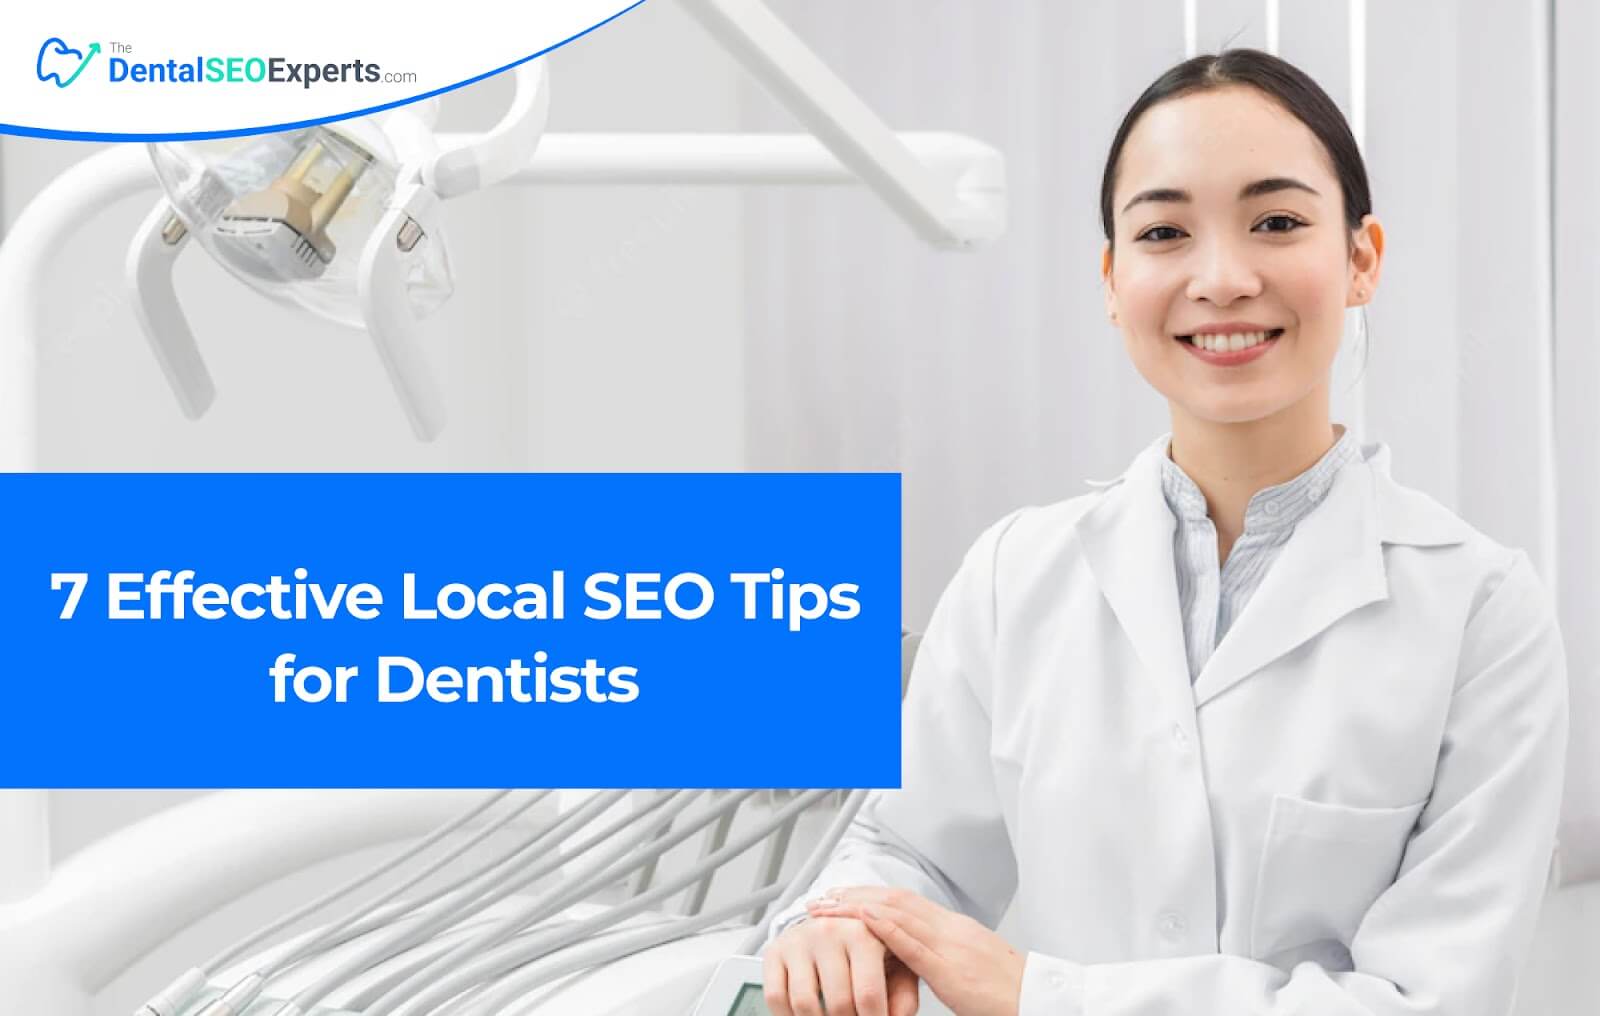 7 Effective Local SEO Tips for Dentists